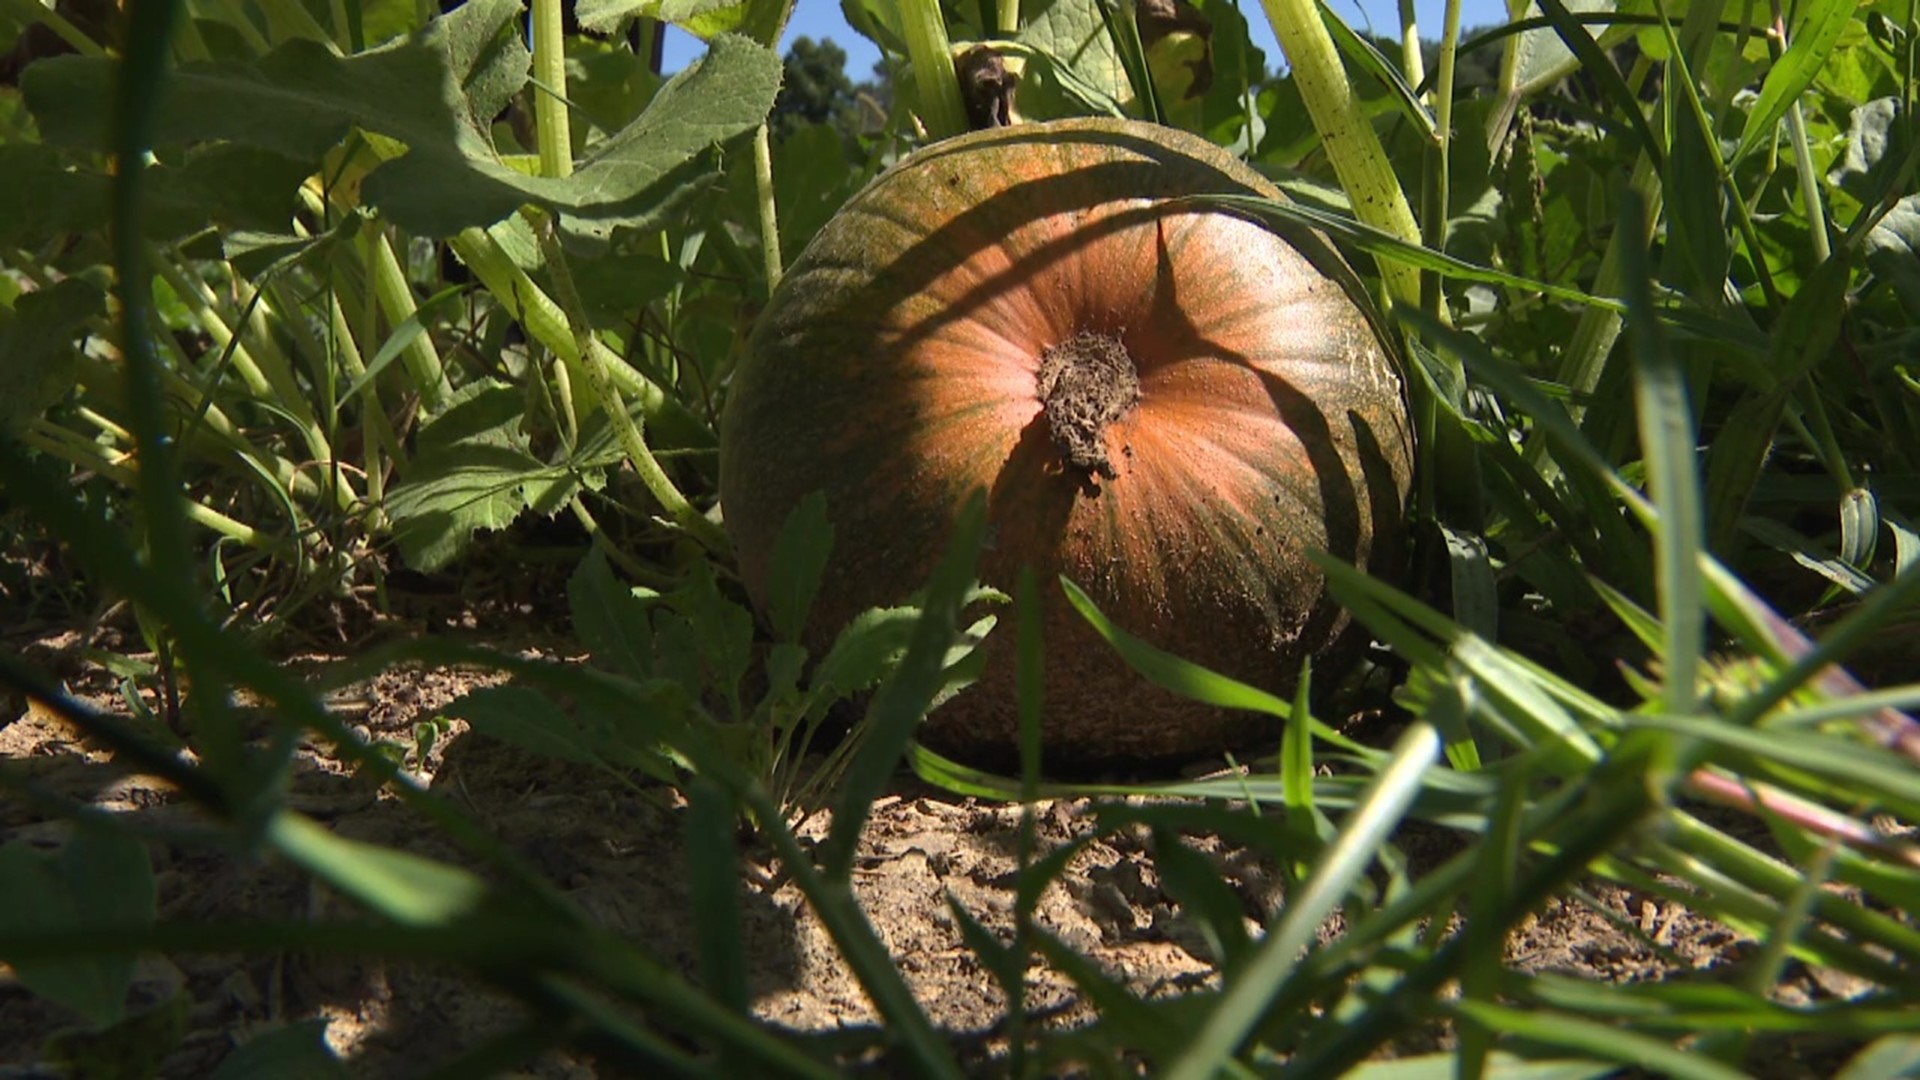 At a farm in Carbon County, drought conditions have taken a toll on all types of crops, including pumpkins.